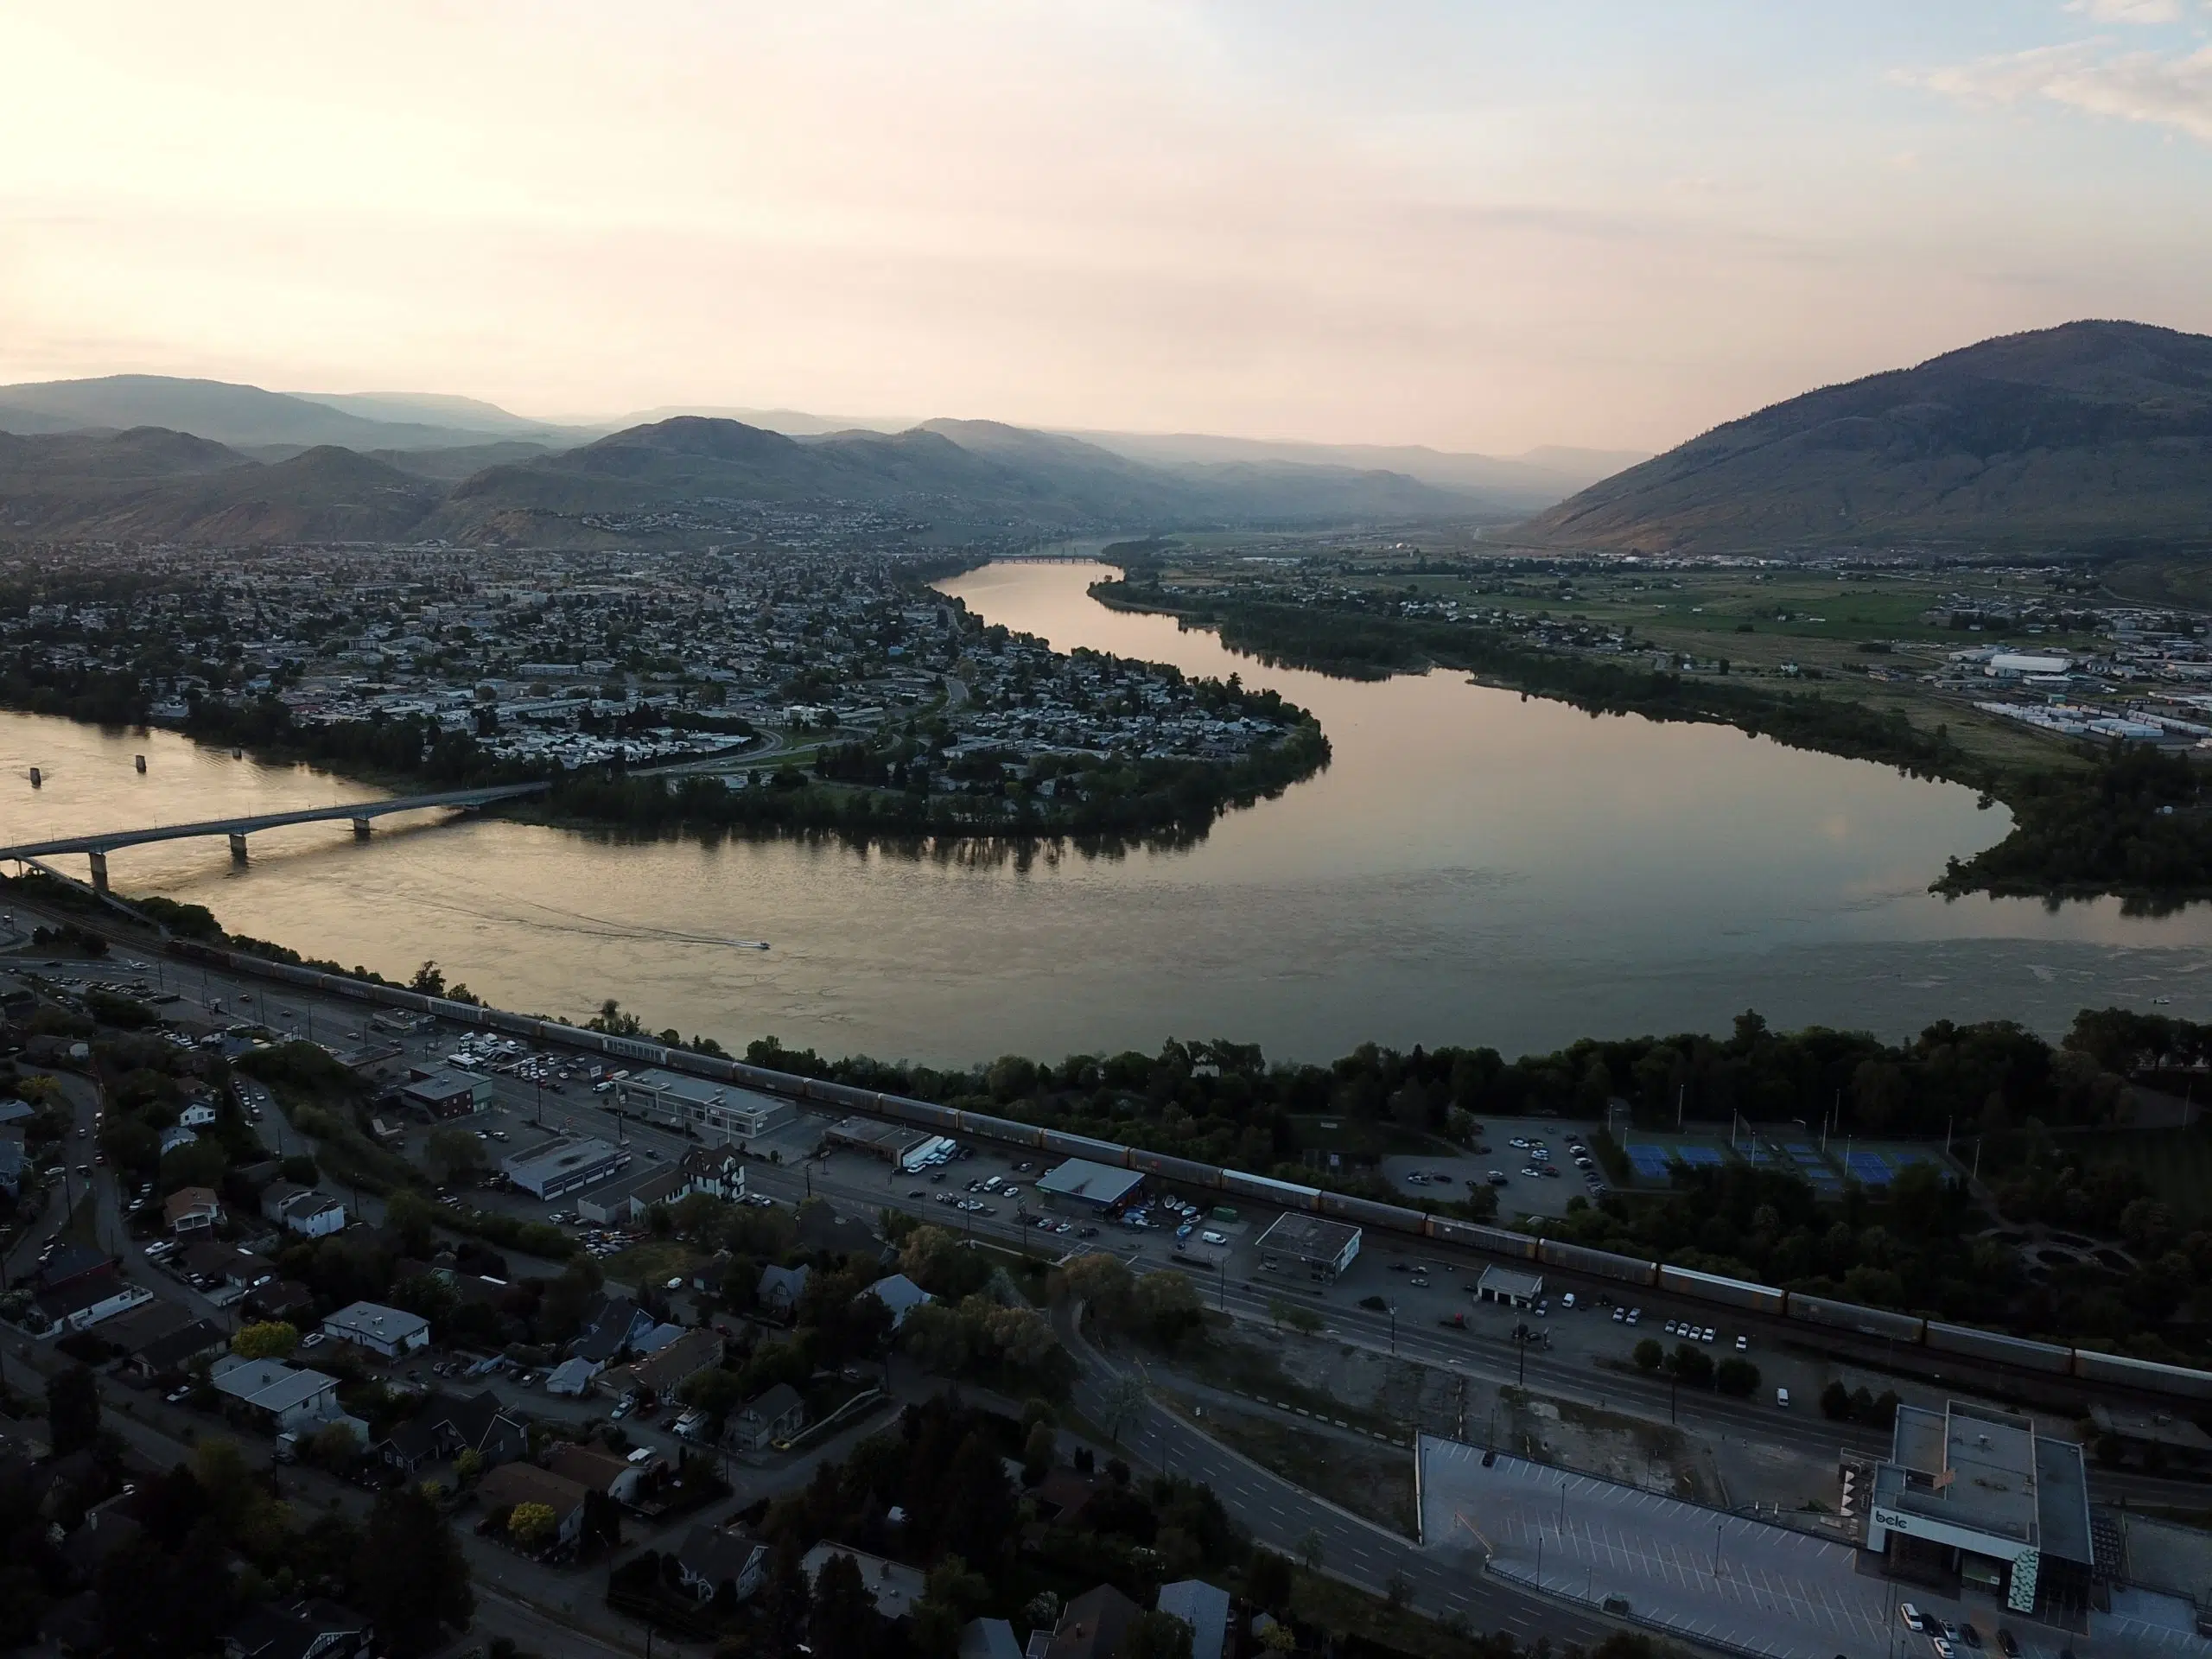 City of Kamloops officials already starting to plan for another river crossing